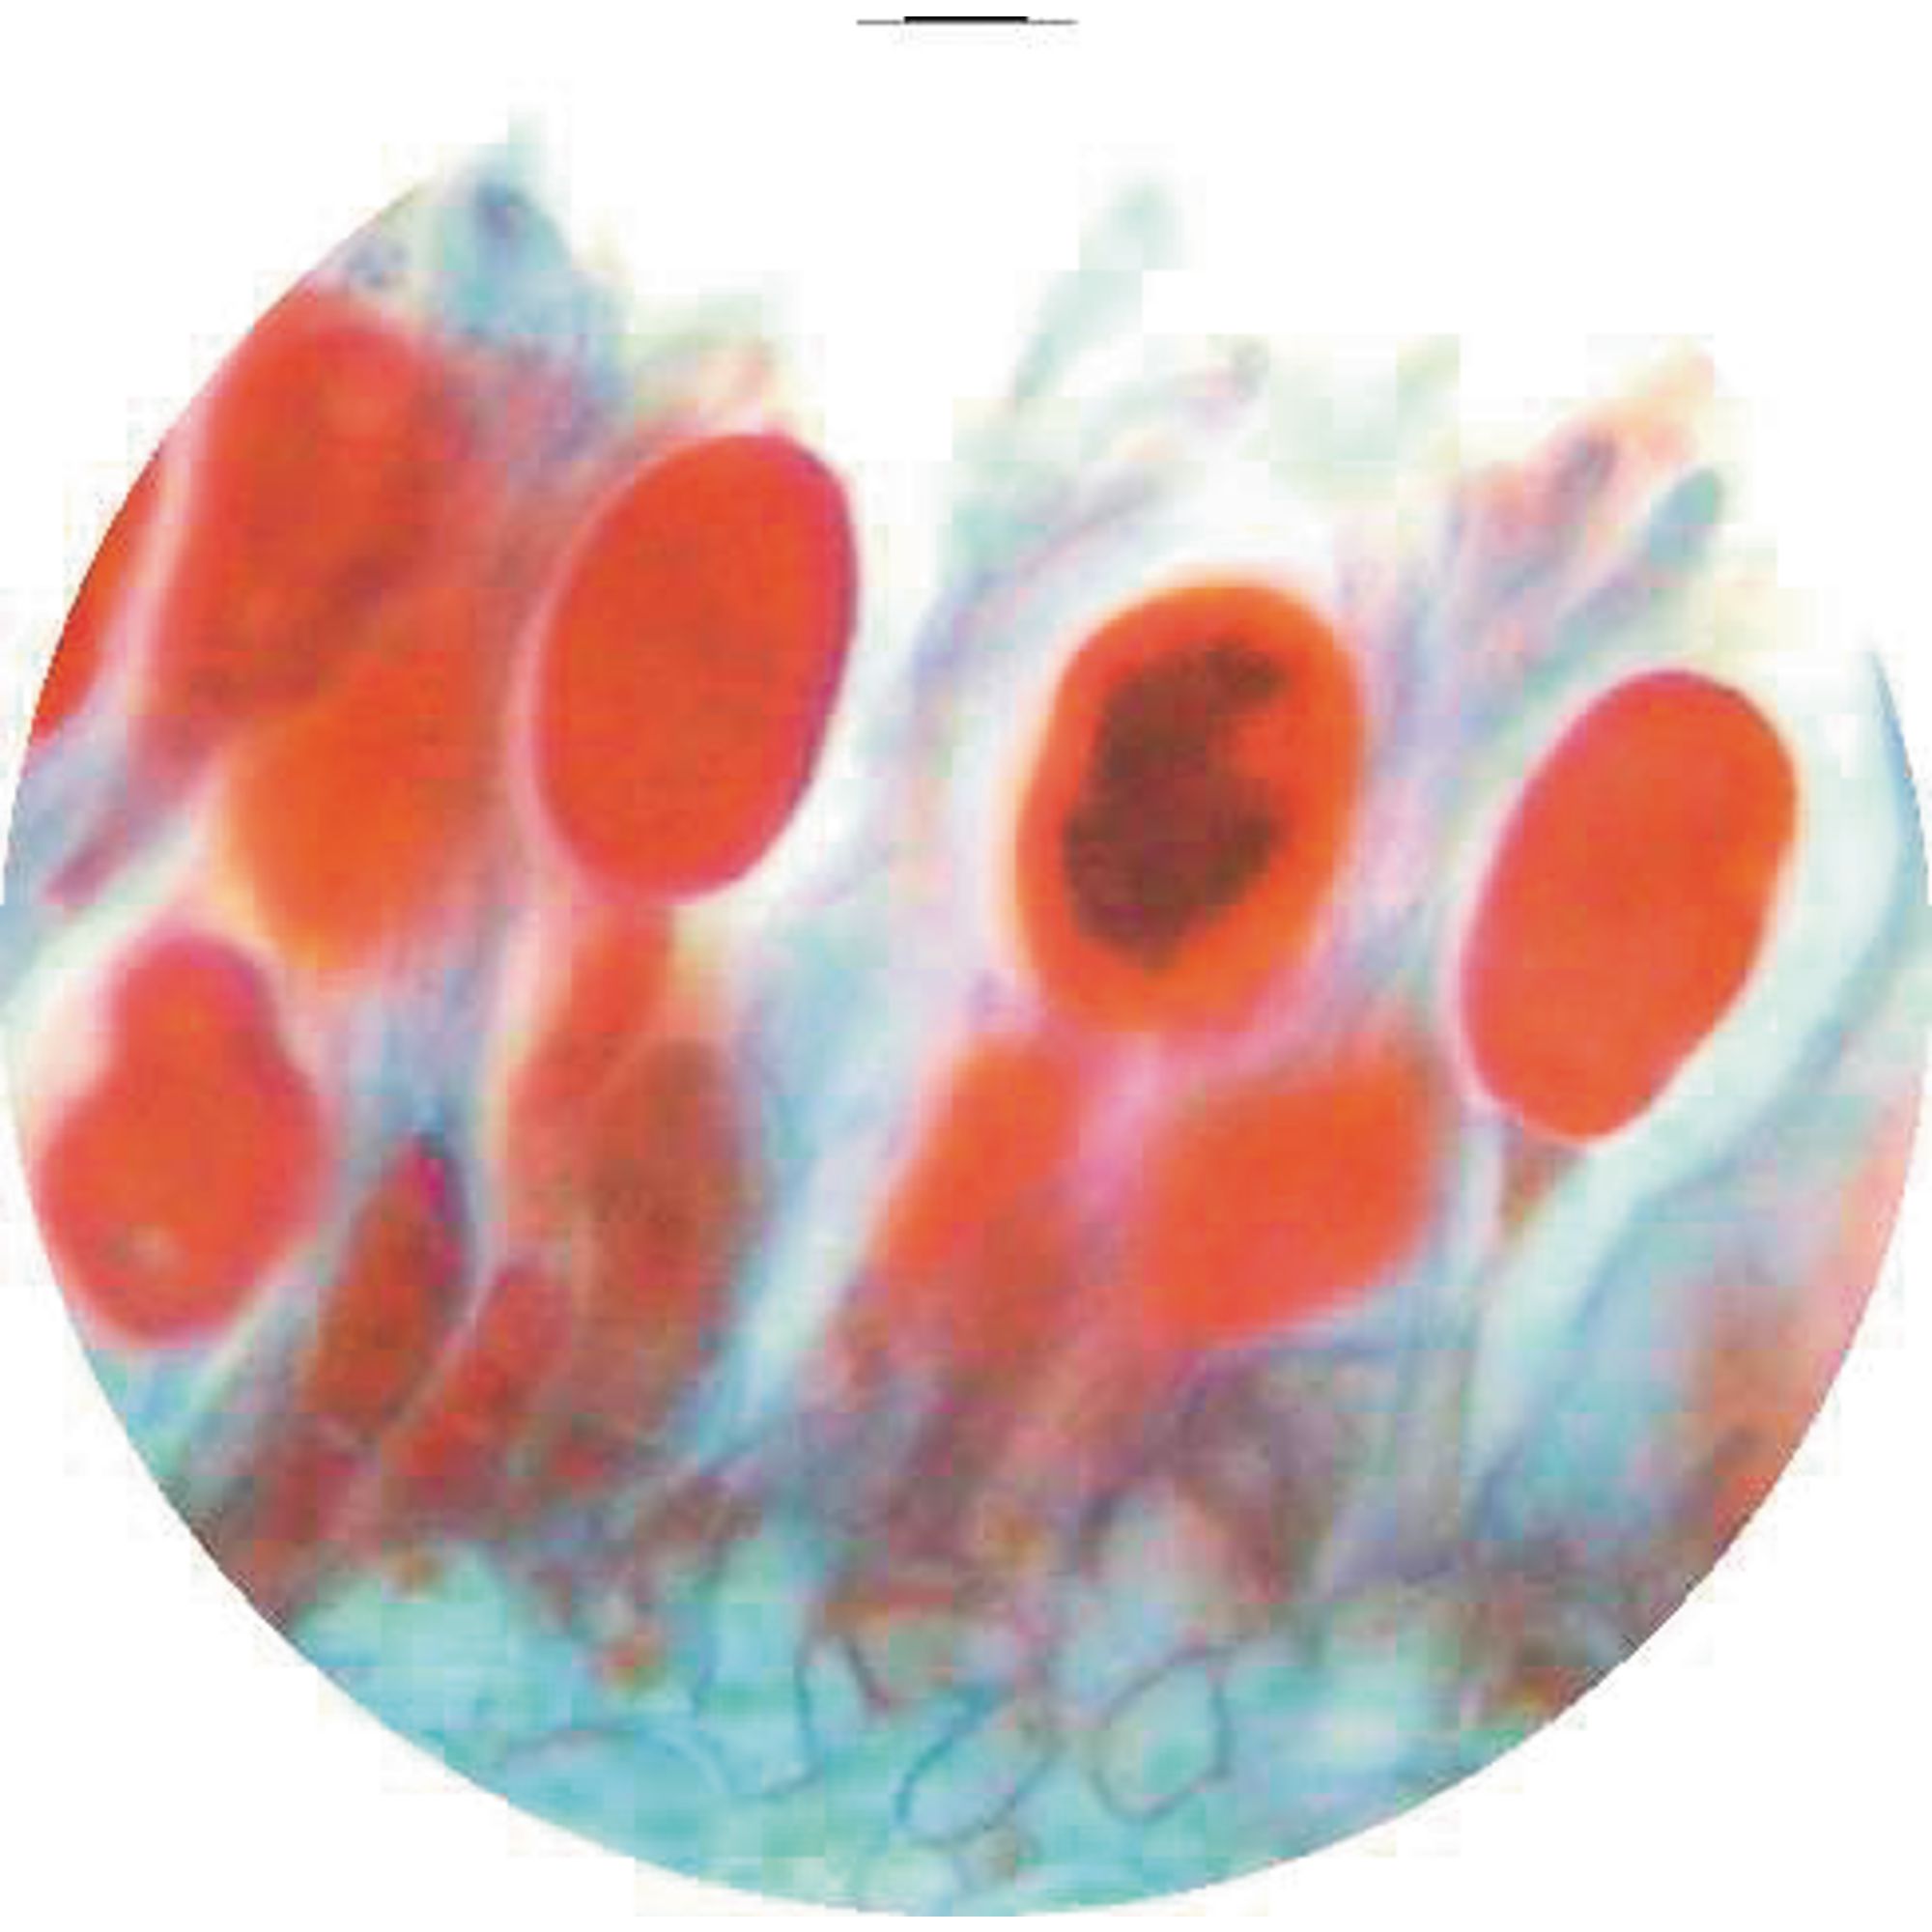 Ectotrophic Mycorrhiza In Pine Rootlet